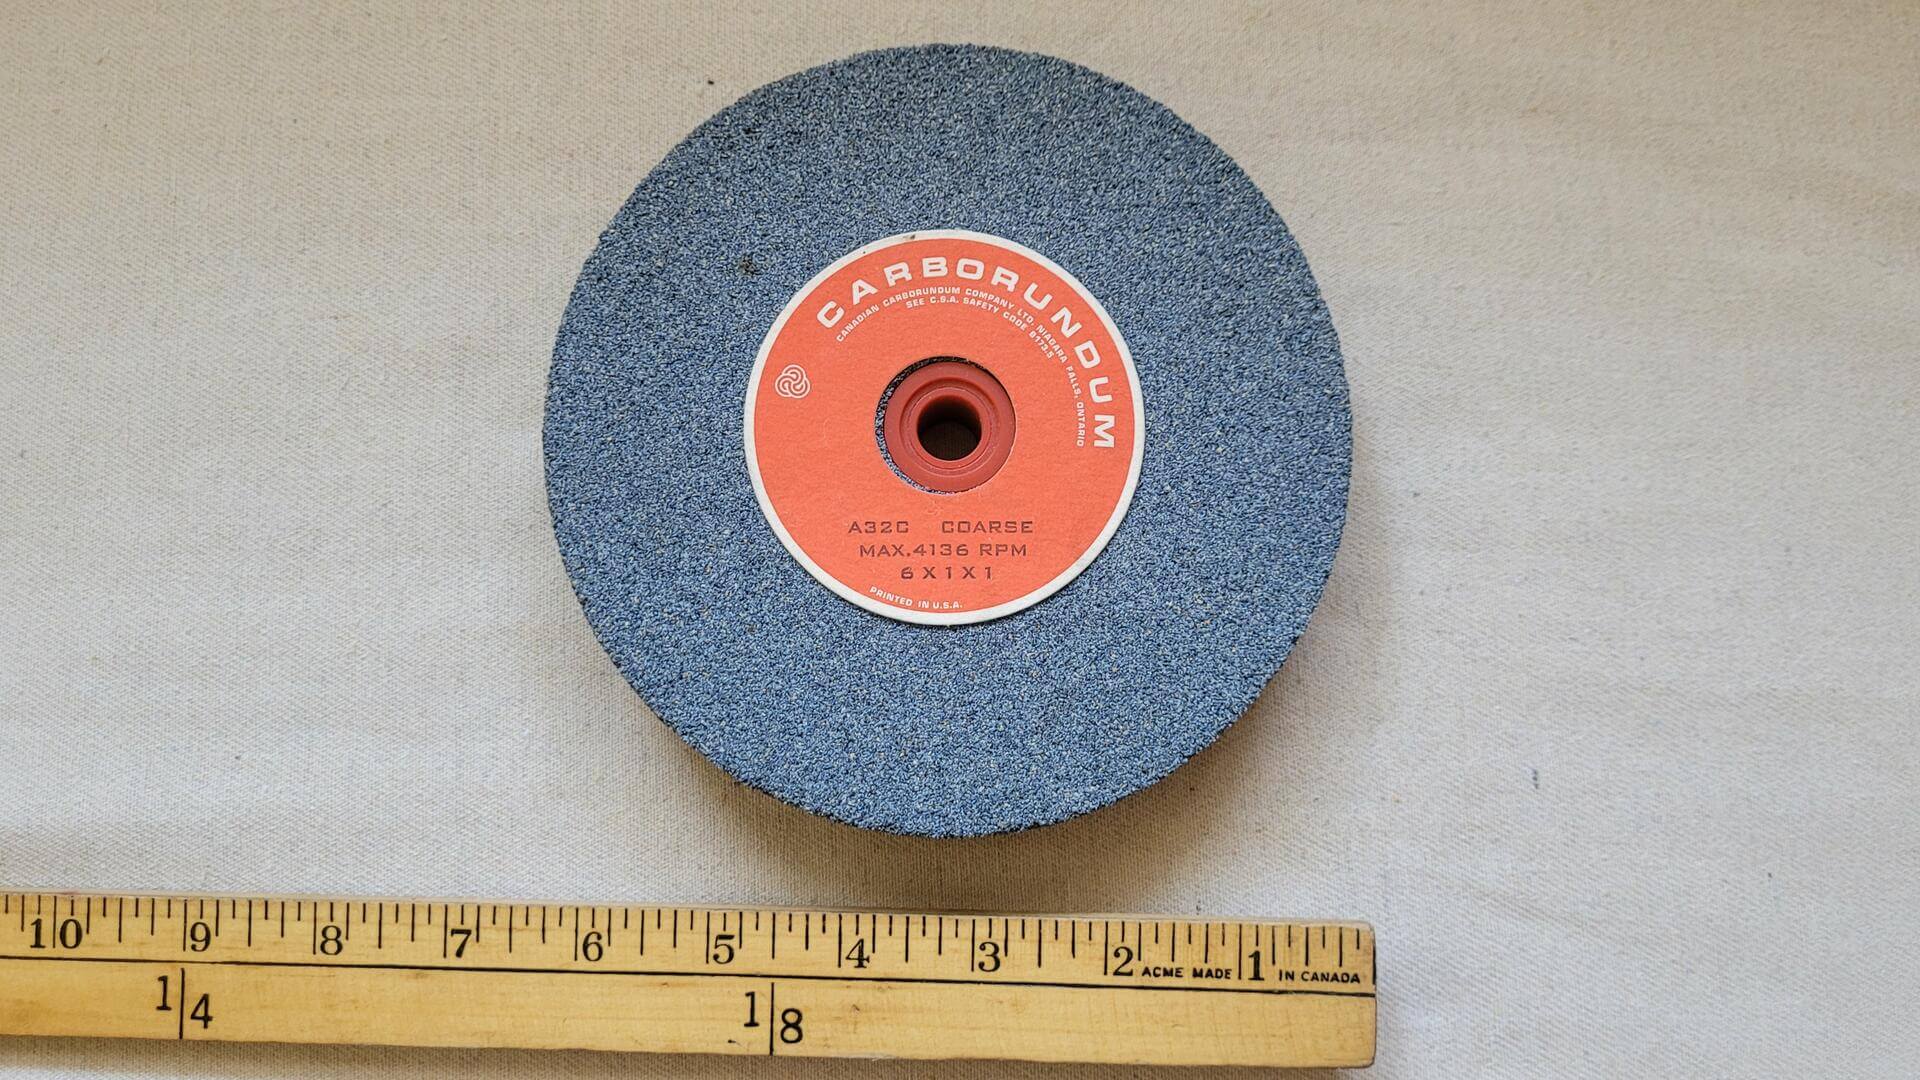 Rare Canadian Carborundum Company Ltd Grinding Wheel Niagara Falls ON - Antique and Vintage collectible made in Canada abrasives, grinding wheels and sharpening stones